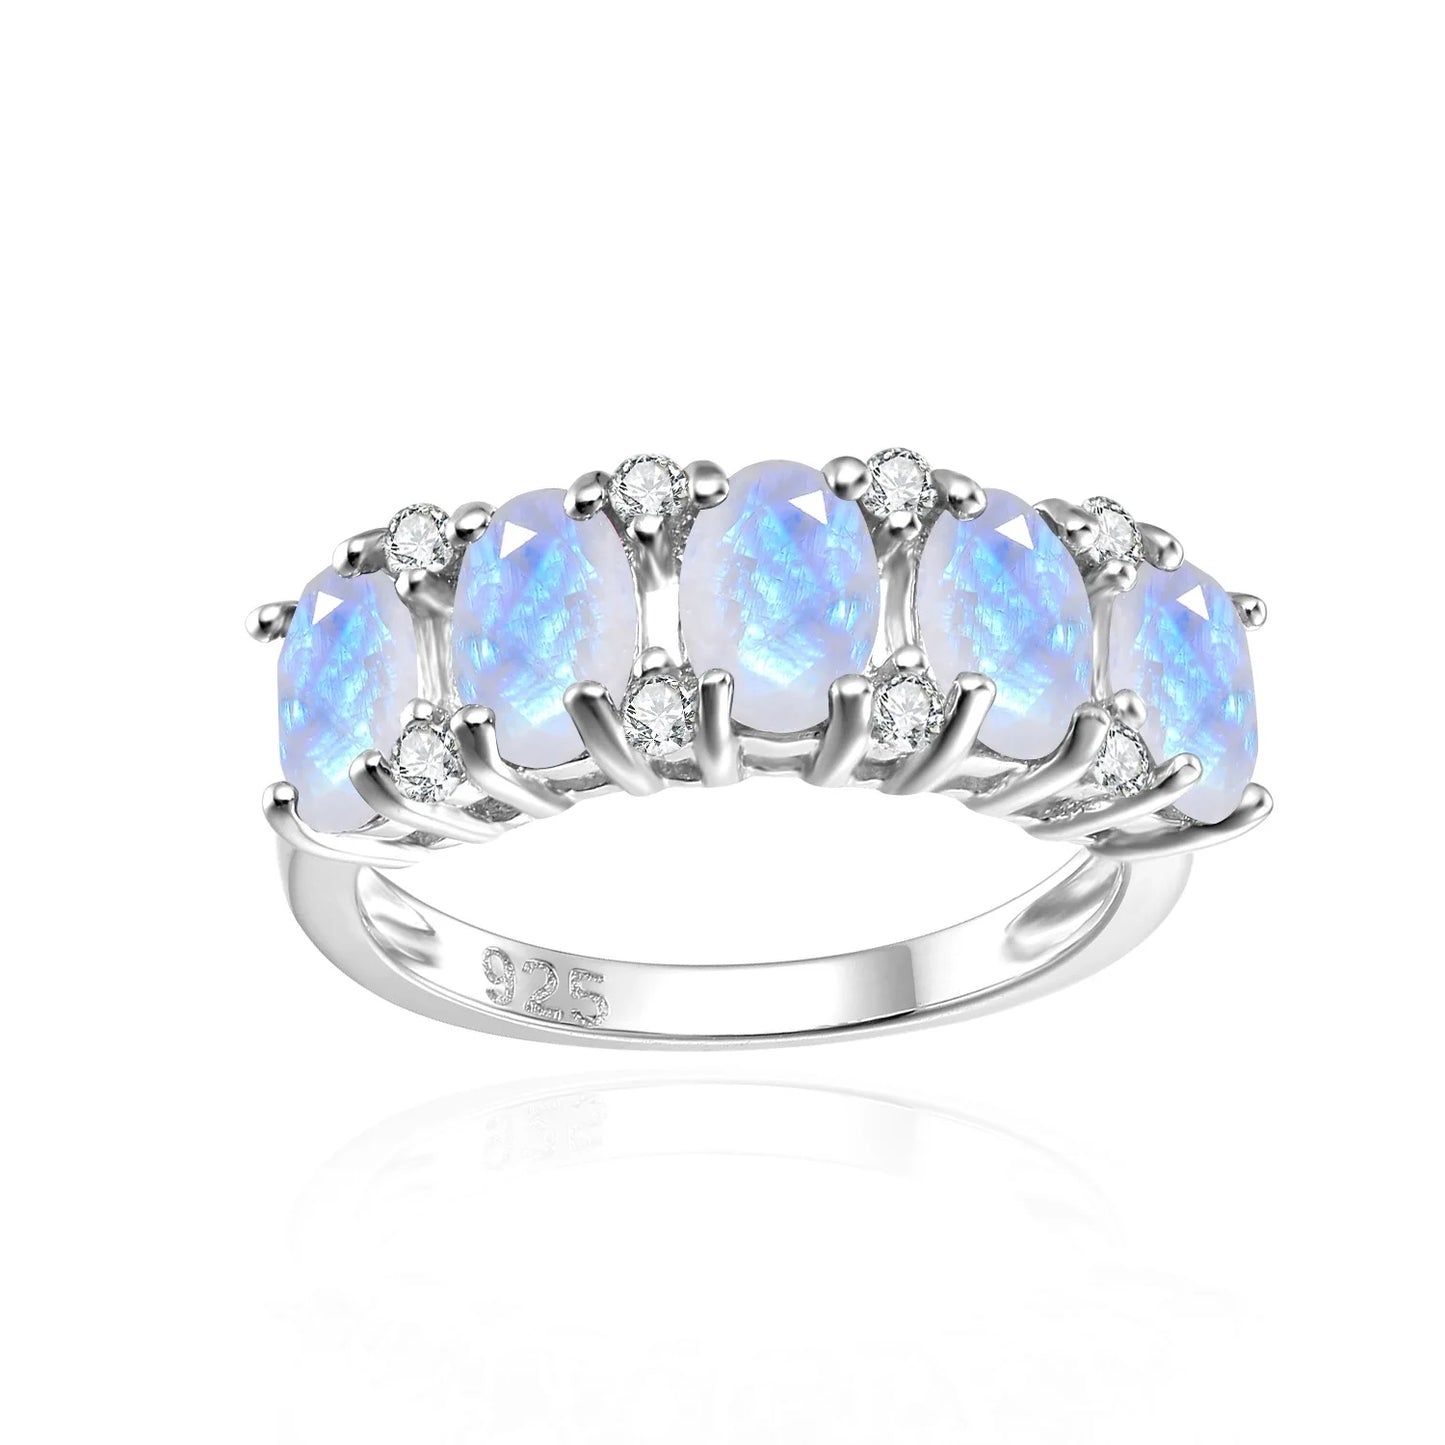 GEM'S BALLET 925 Sterling Silver Wedding Bands Ring Natural Milky Blue Moonstone Gamstone Ring For Women Wedding Fine Jewelry